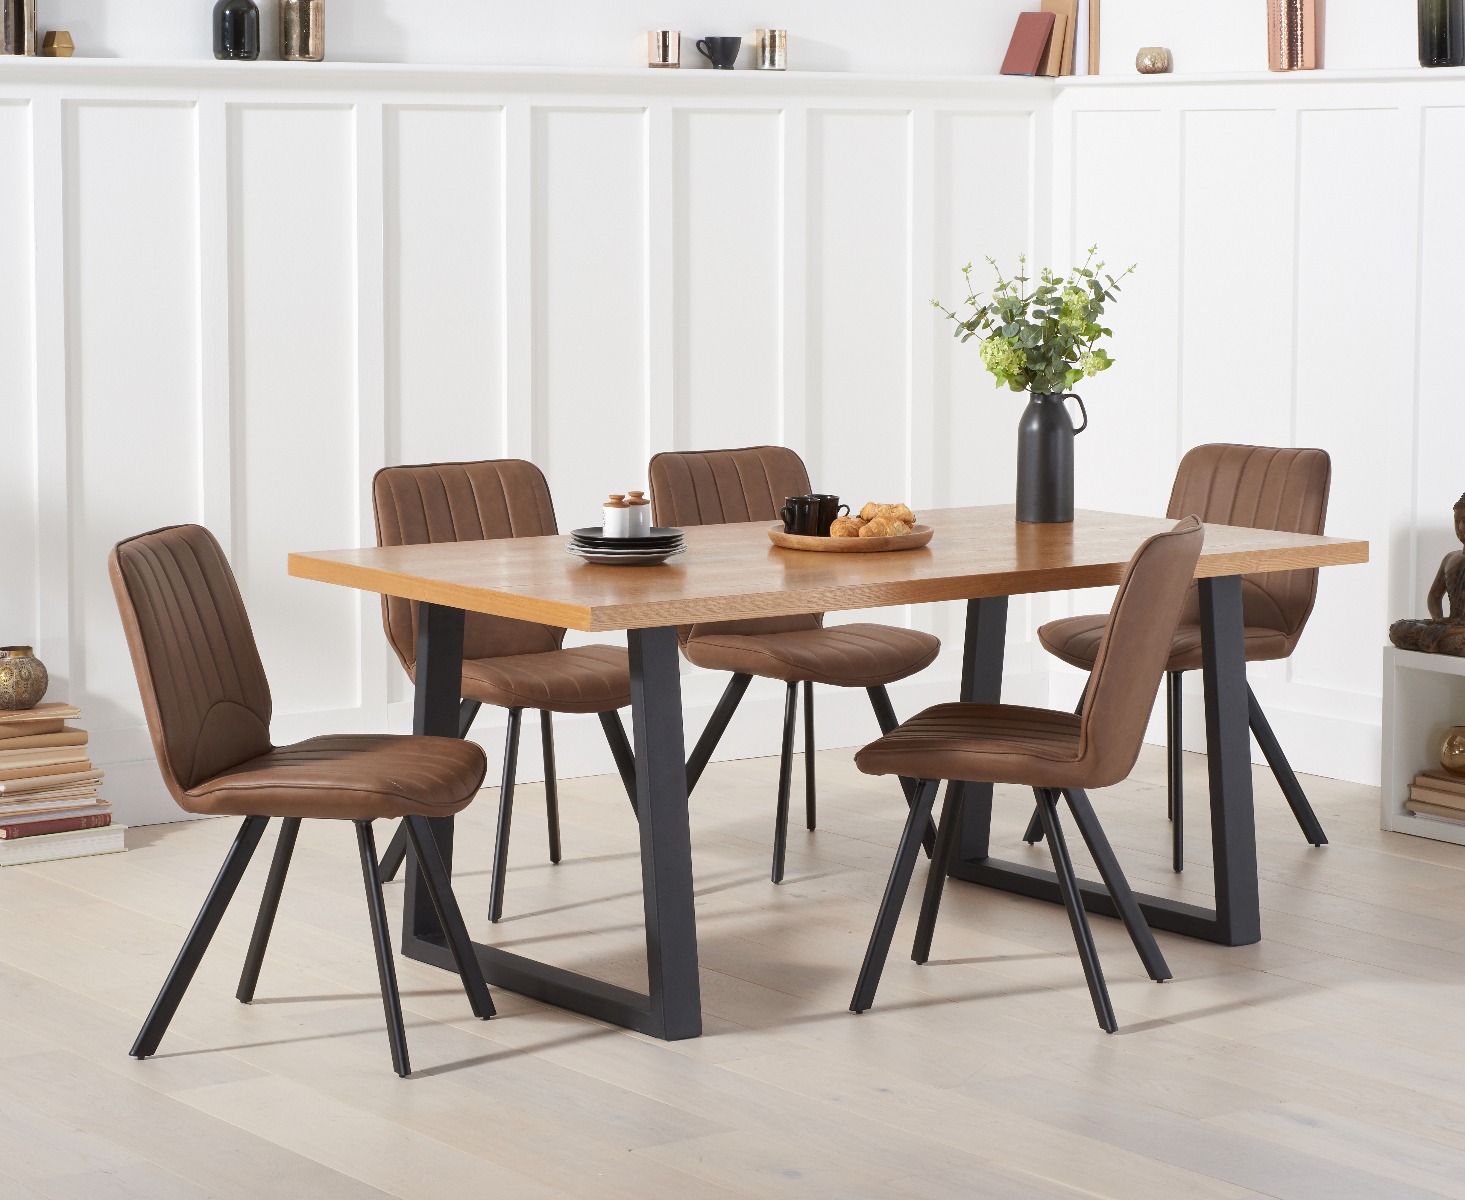 Photo 1 of Urban 180cm ash and veneer industrial dining table with 6 grey hendrick chairs